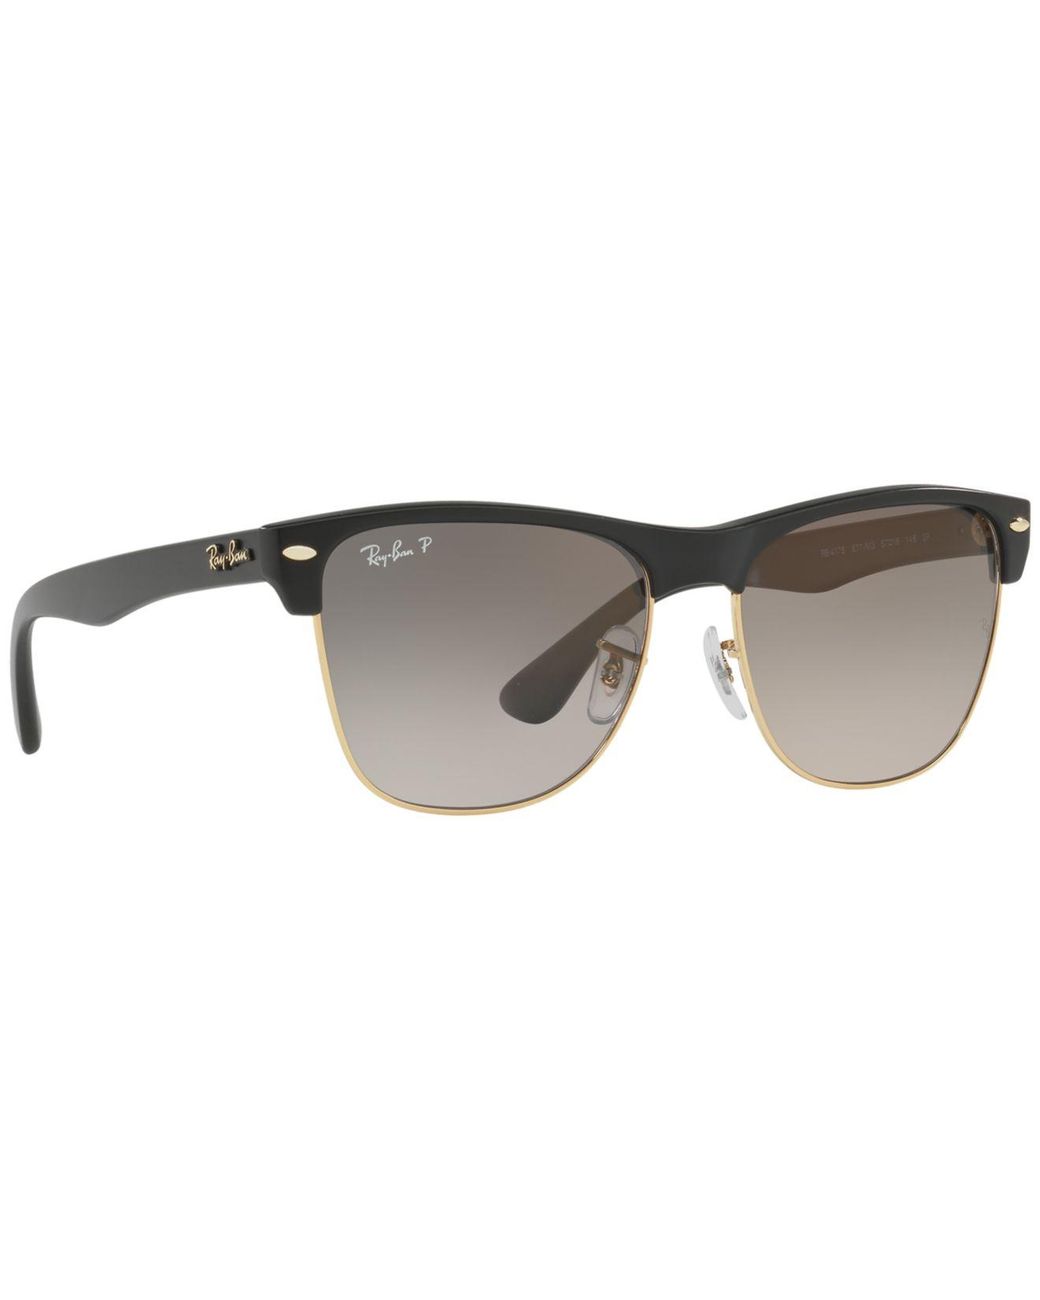 Ray-Ban Clubmaster Oversized Sunglasses, Rb4175 57 in Gray for Men - Lyst